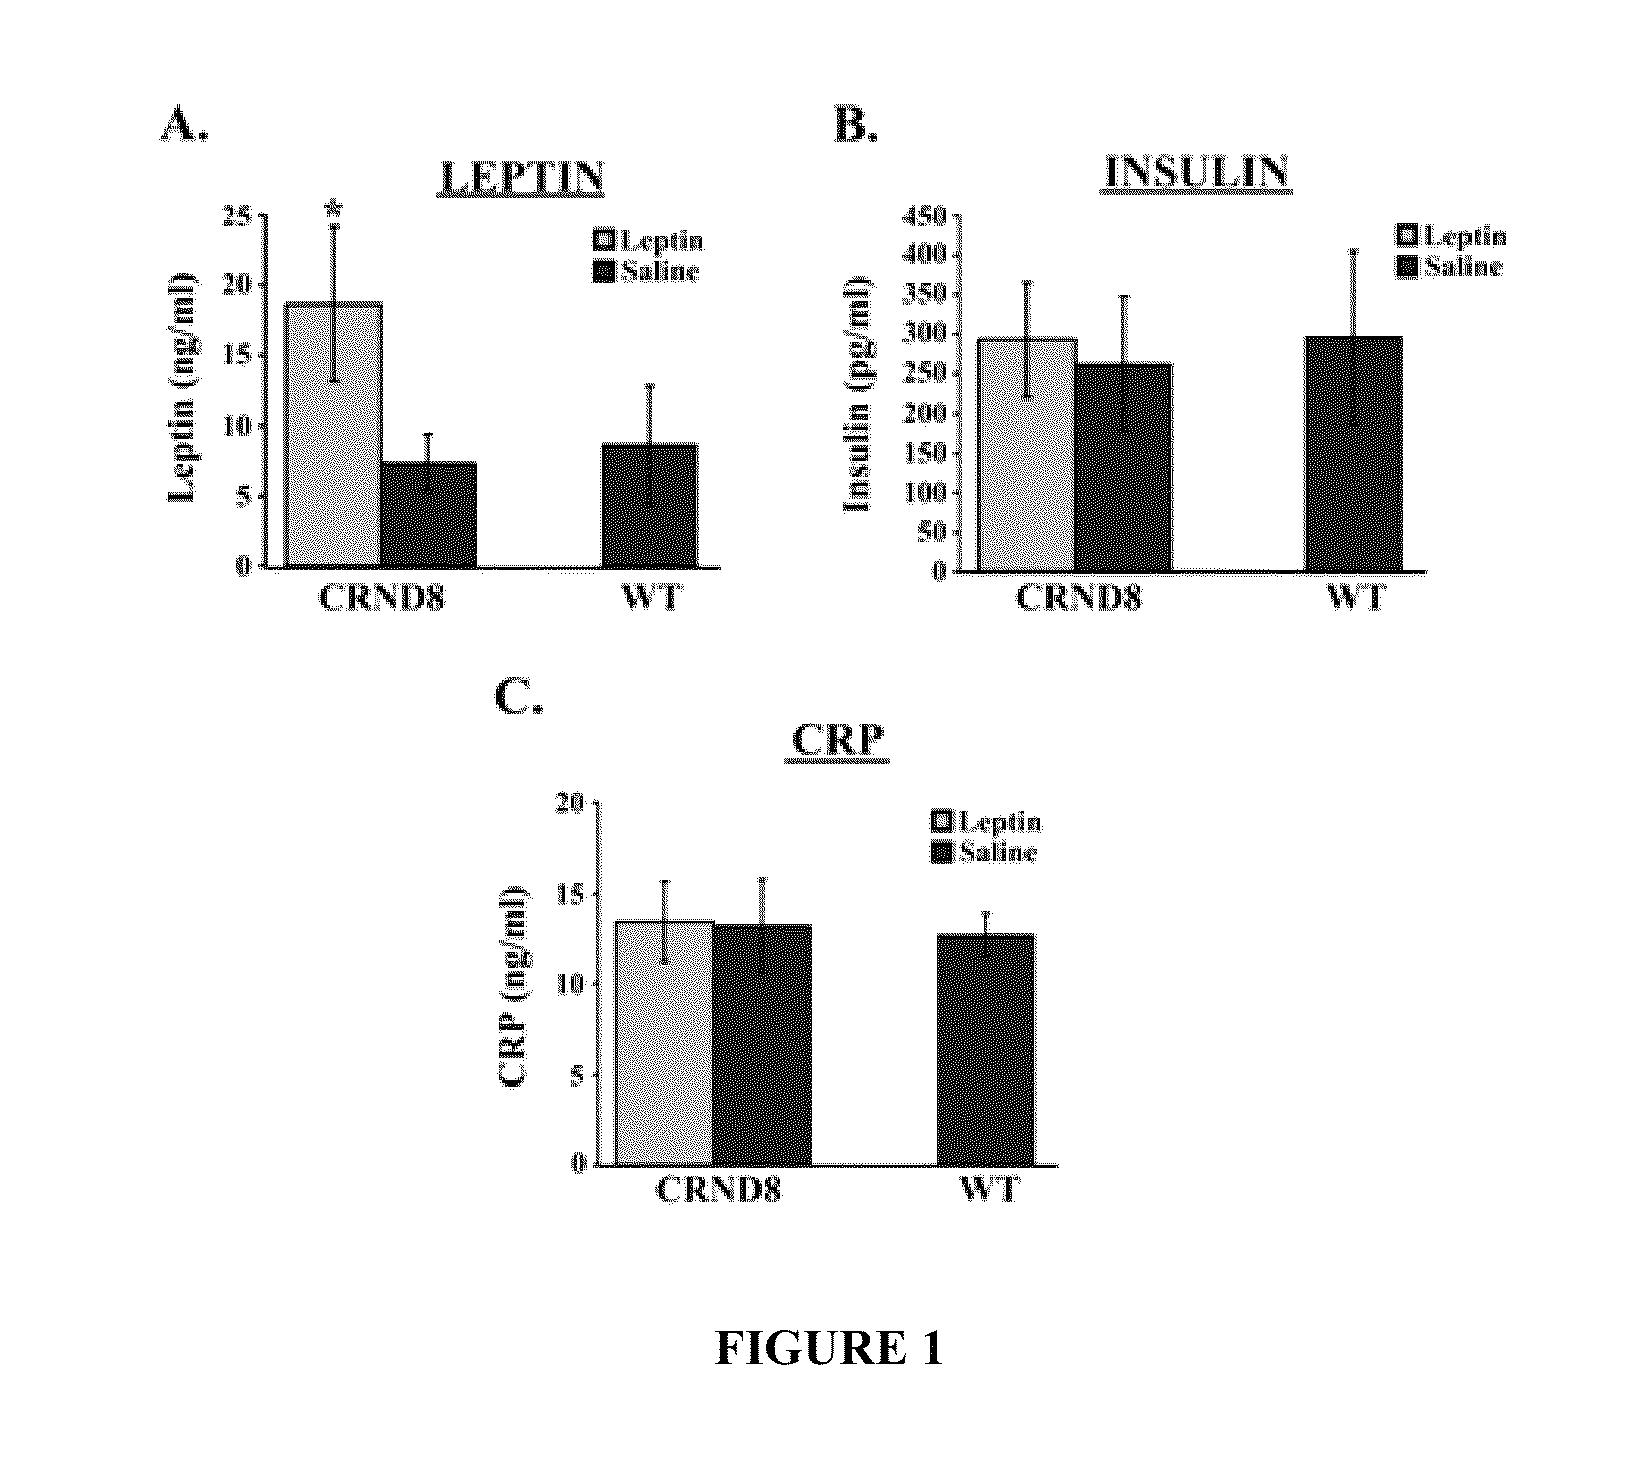 Leptin compositions and methods for treating progressive cognitive function disorders resulting from accumulation of neurofibrillary tangles and amyloid beta